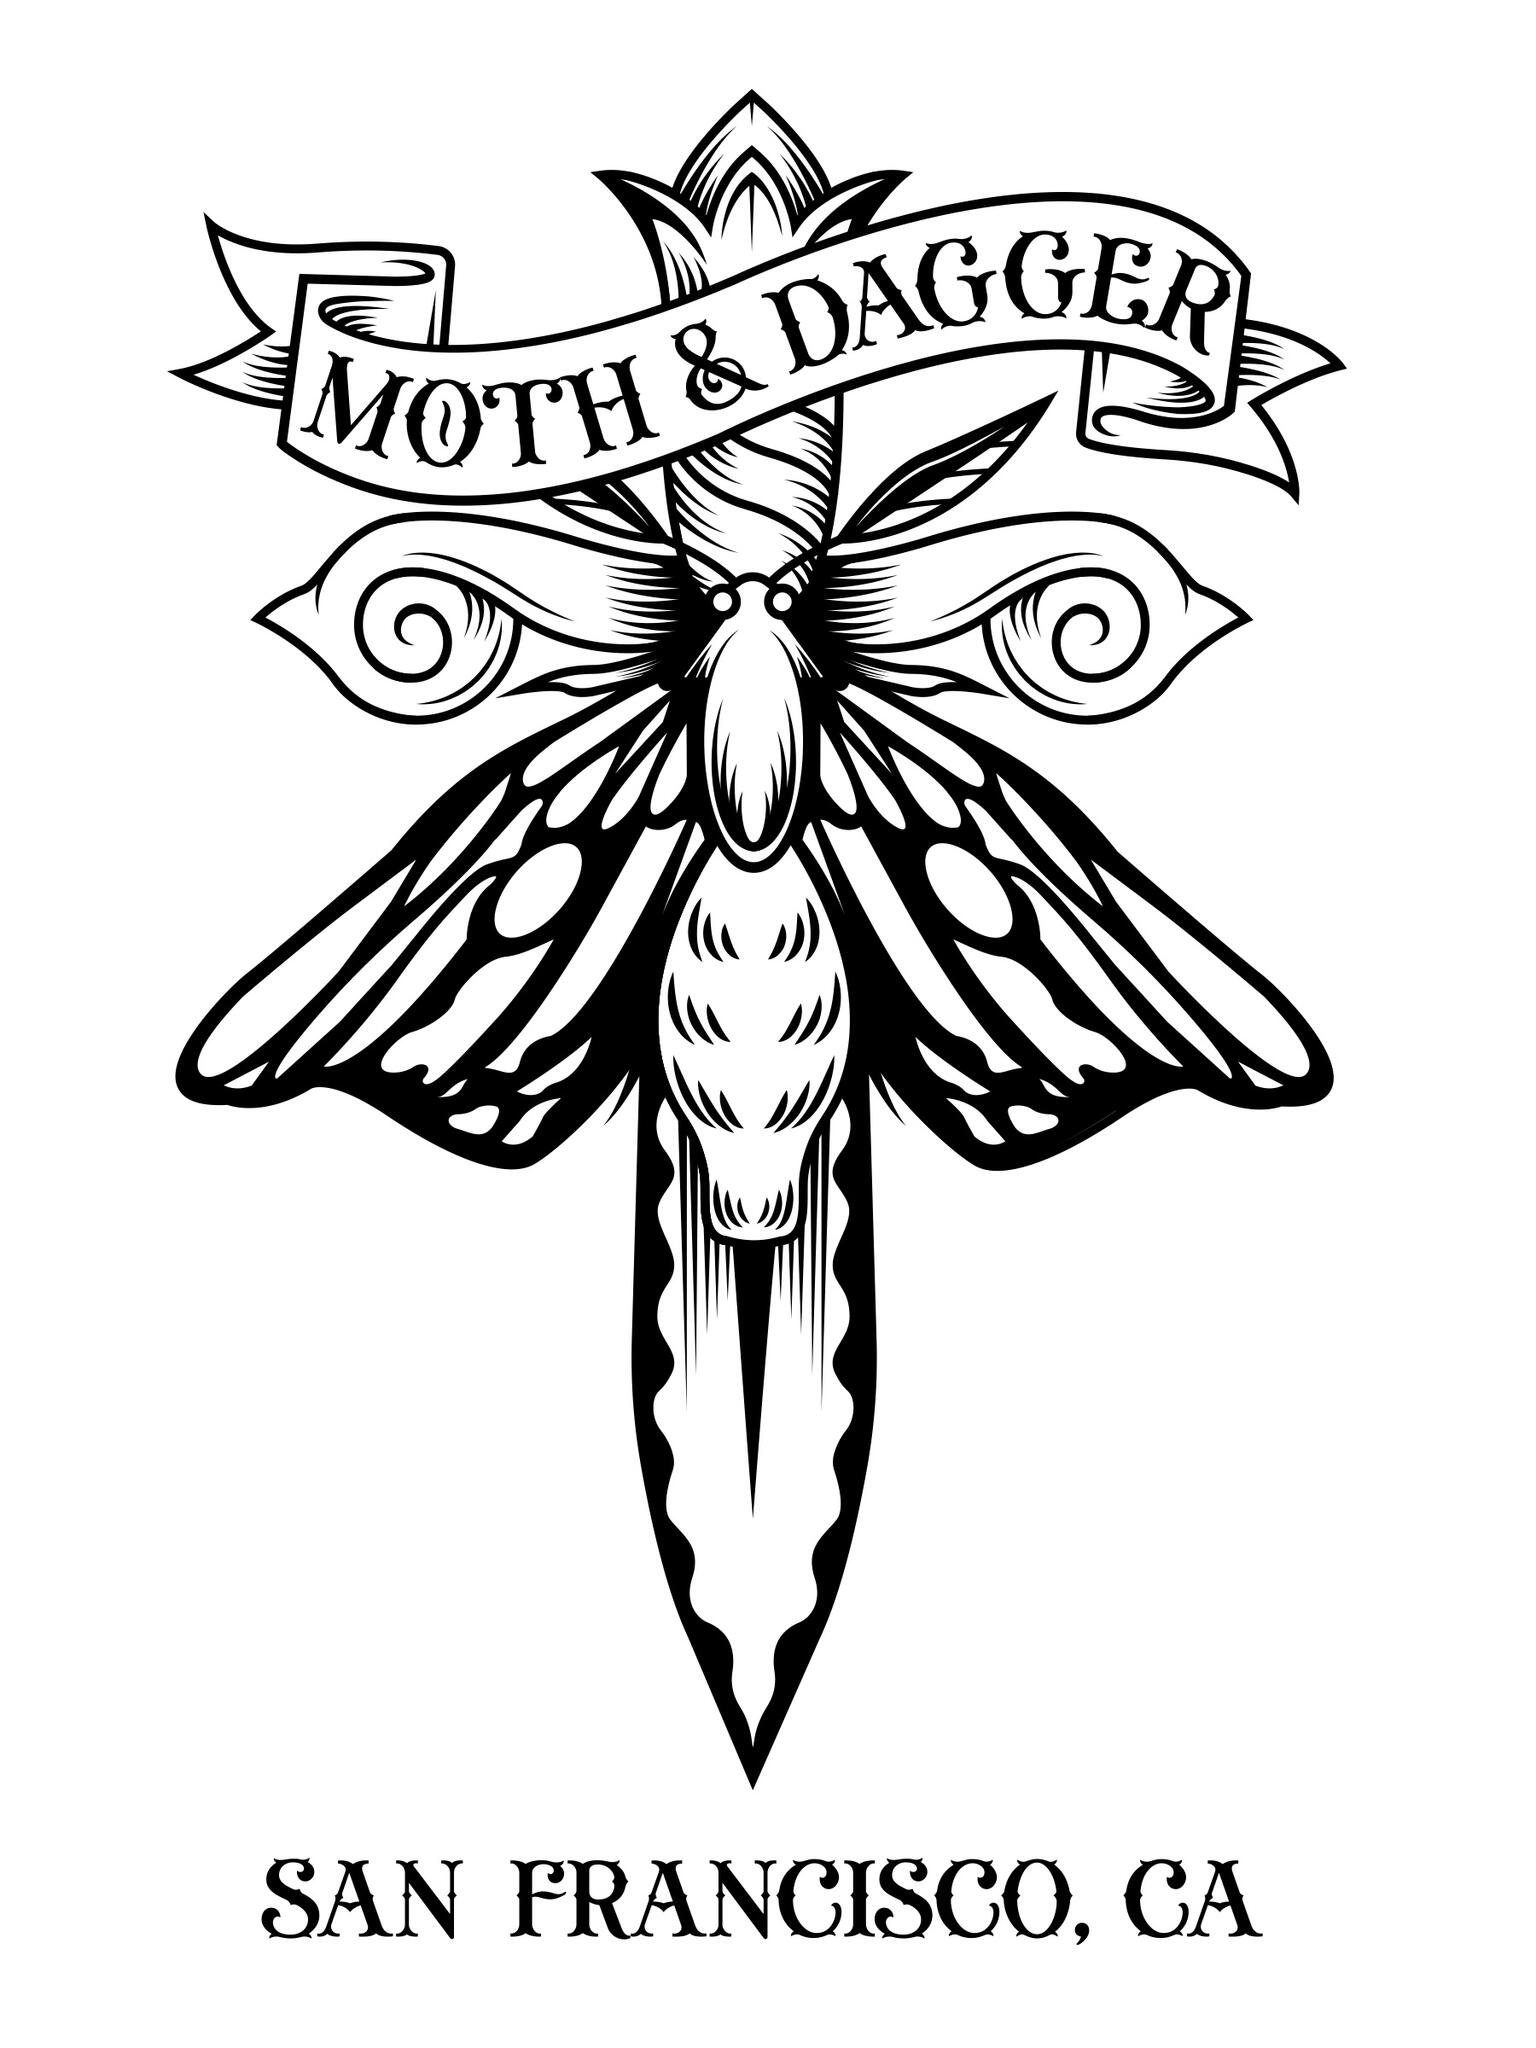 60 for One Hour of Tattooing at Moth and Dagger Tattoo Studio 140 Value   Moth and Dagger Tattoo Studio  Groupon